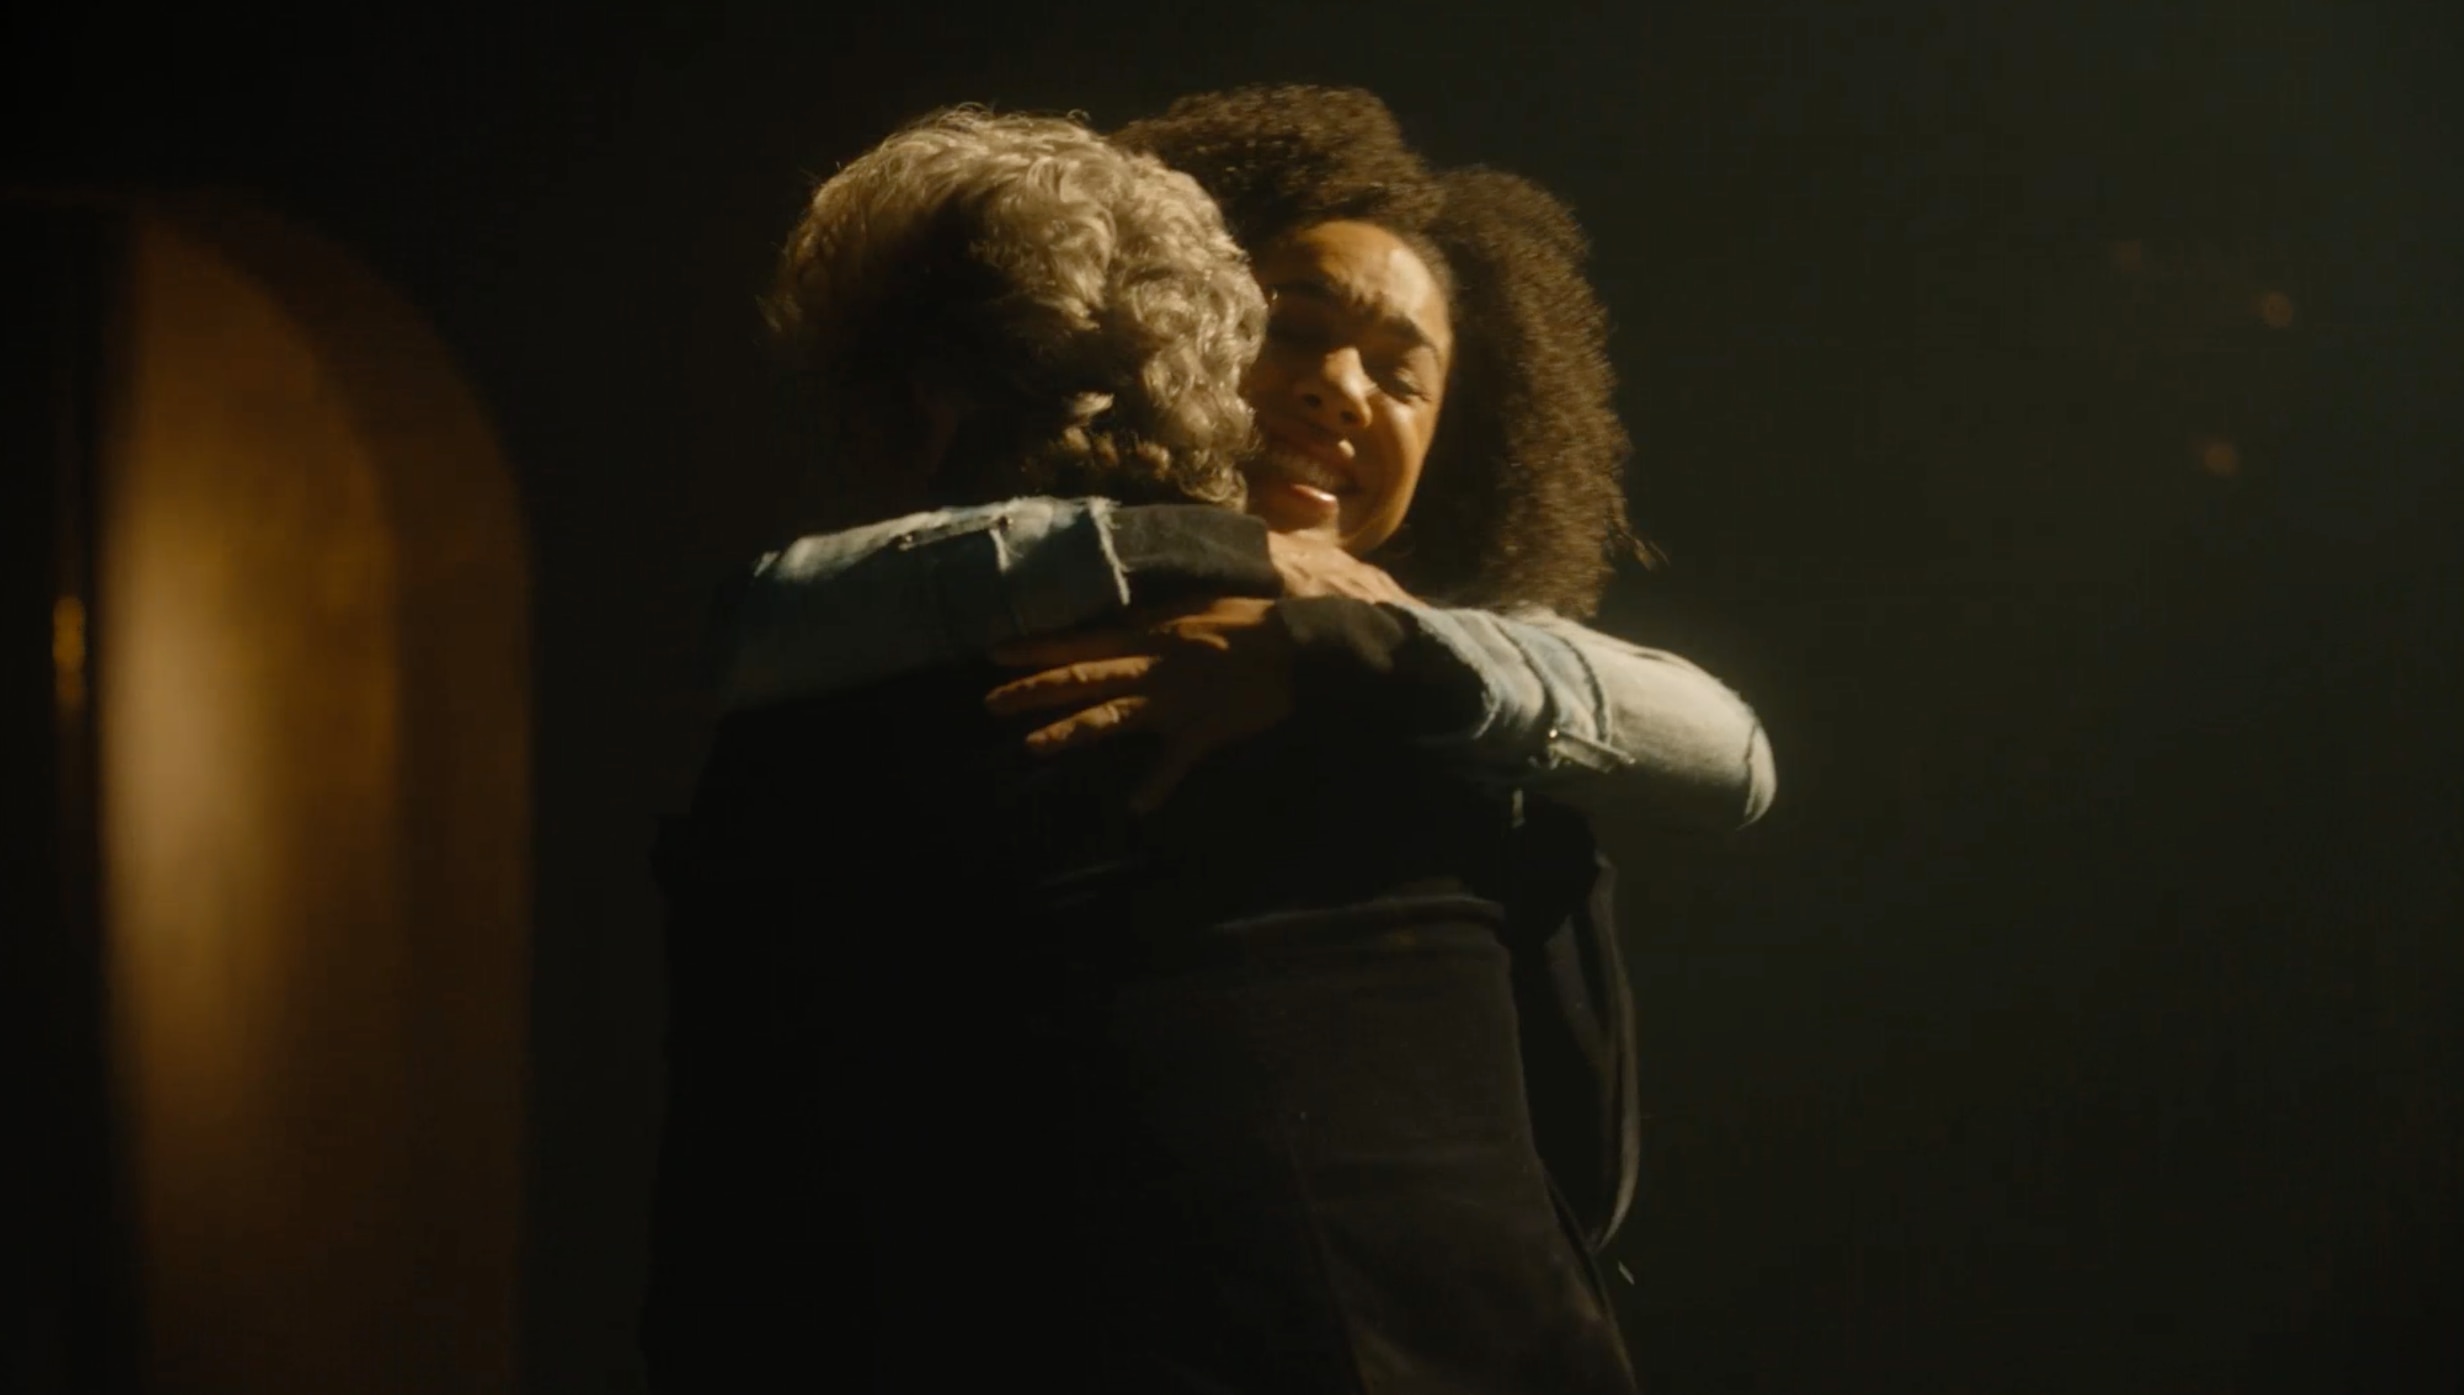 Bill and The Doctor hugging